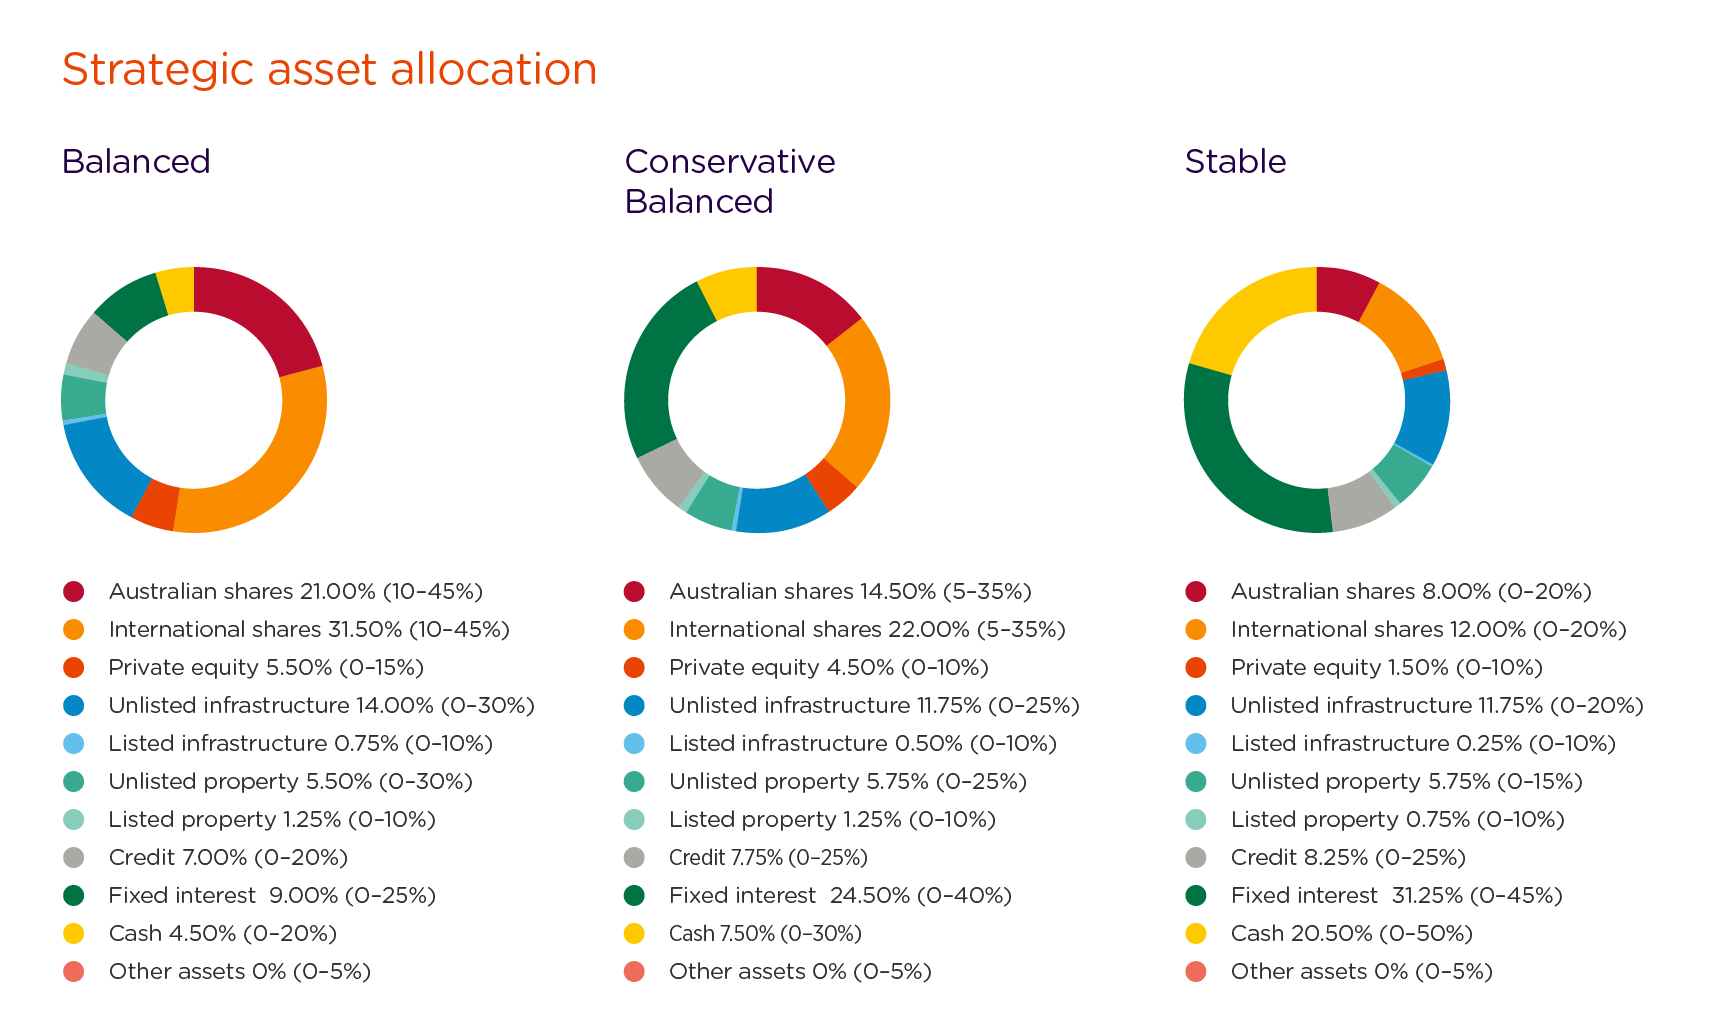 Three pie charts – each showing the strategic asset allocation for the Balanced, Conservative Balanced and Stable options. The Balanced option has a 21% exposure to Australian shares and a 31.5% exposure to international shares.